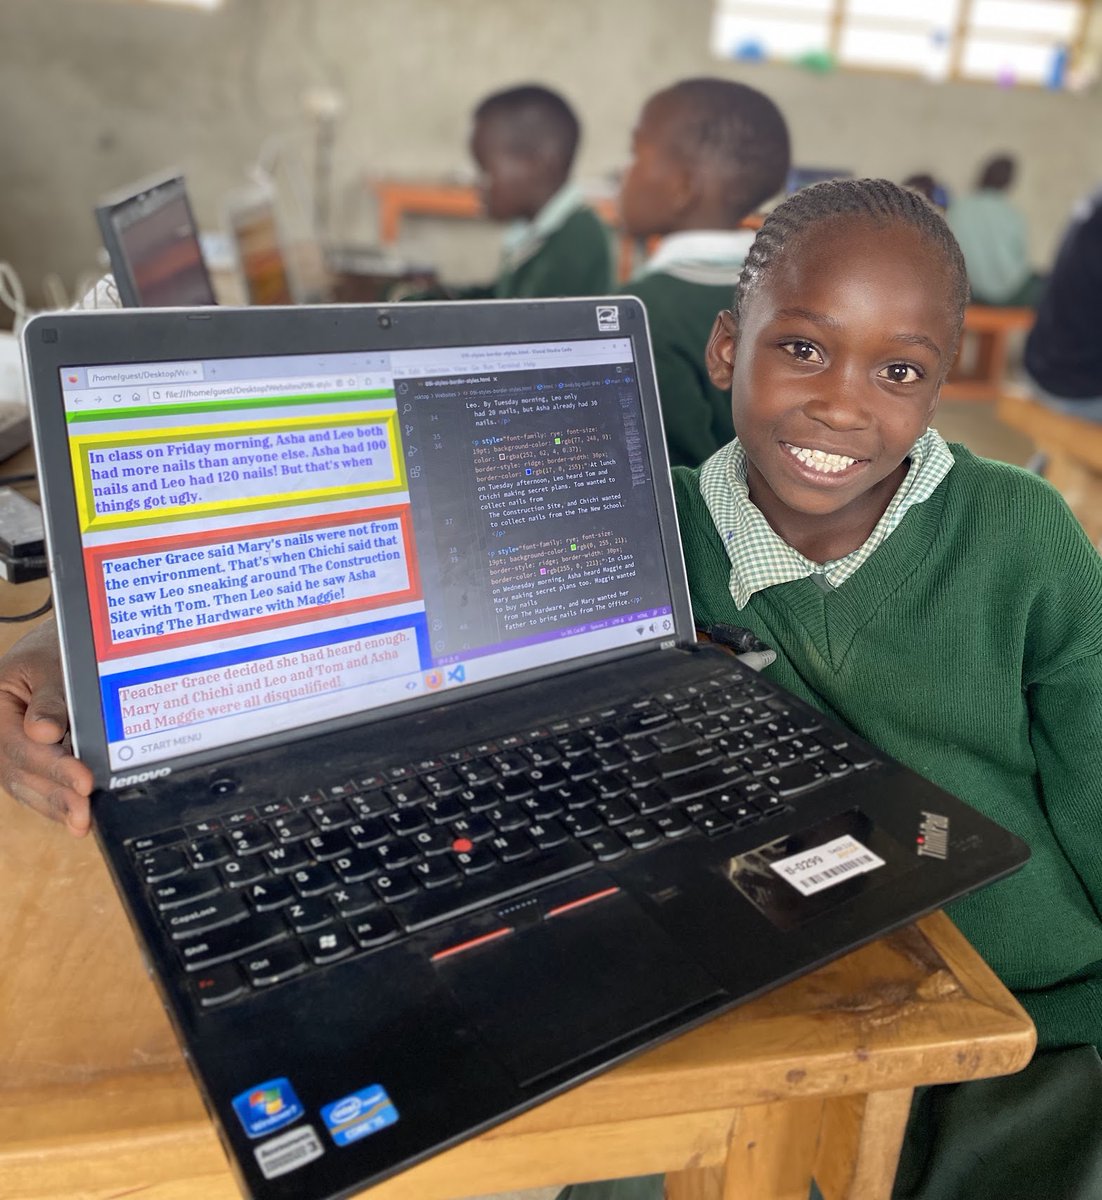 @techlitafrica 2023 Recap 2 / 12: Look what Irene made! She took an example HTML file and added inline CSS to change the font and spacing and colors. I’m so proud that TechLit taught HTML in all of our classrooms in 2023. 🧵 1/5 #Recap2023